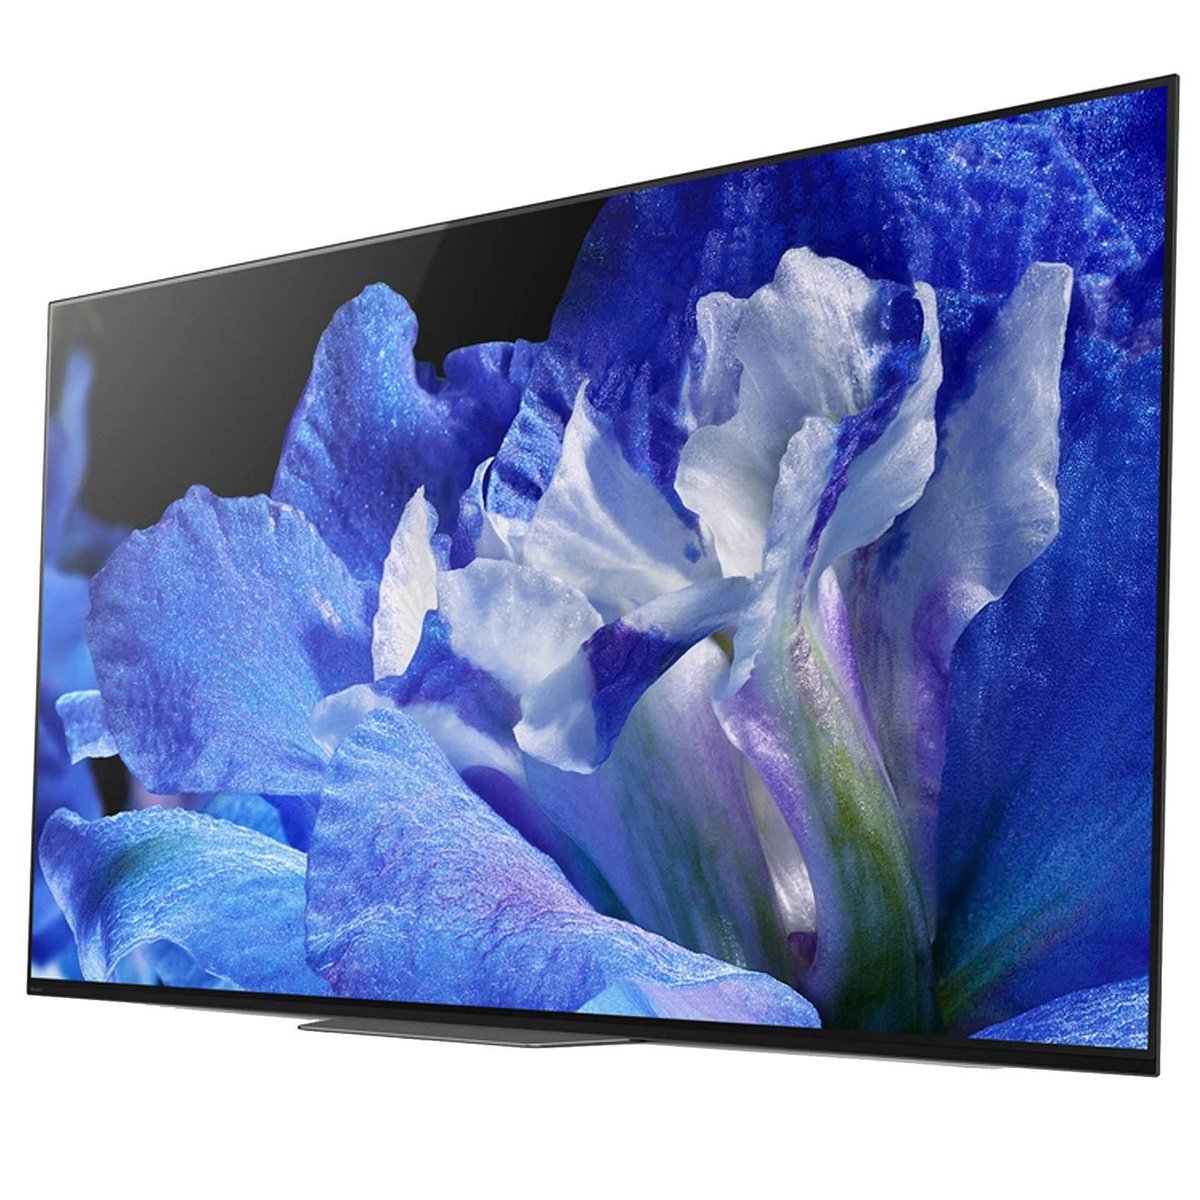 Sony 4K Ultra HD Smart OLED Android TV KDL65A8 65inch